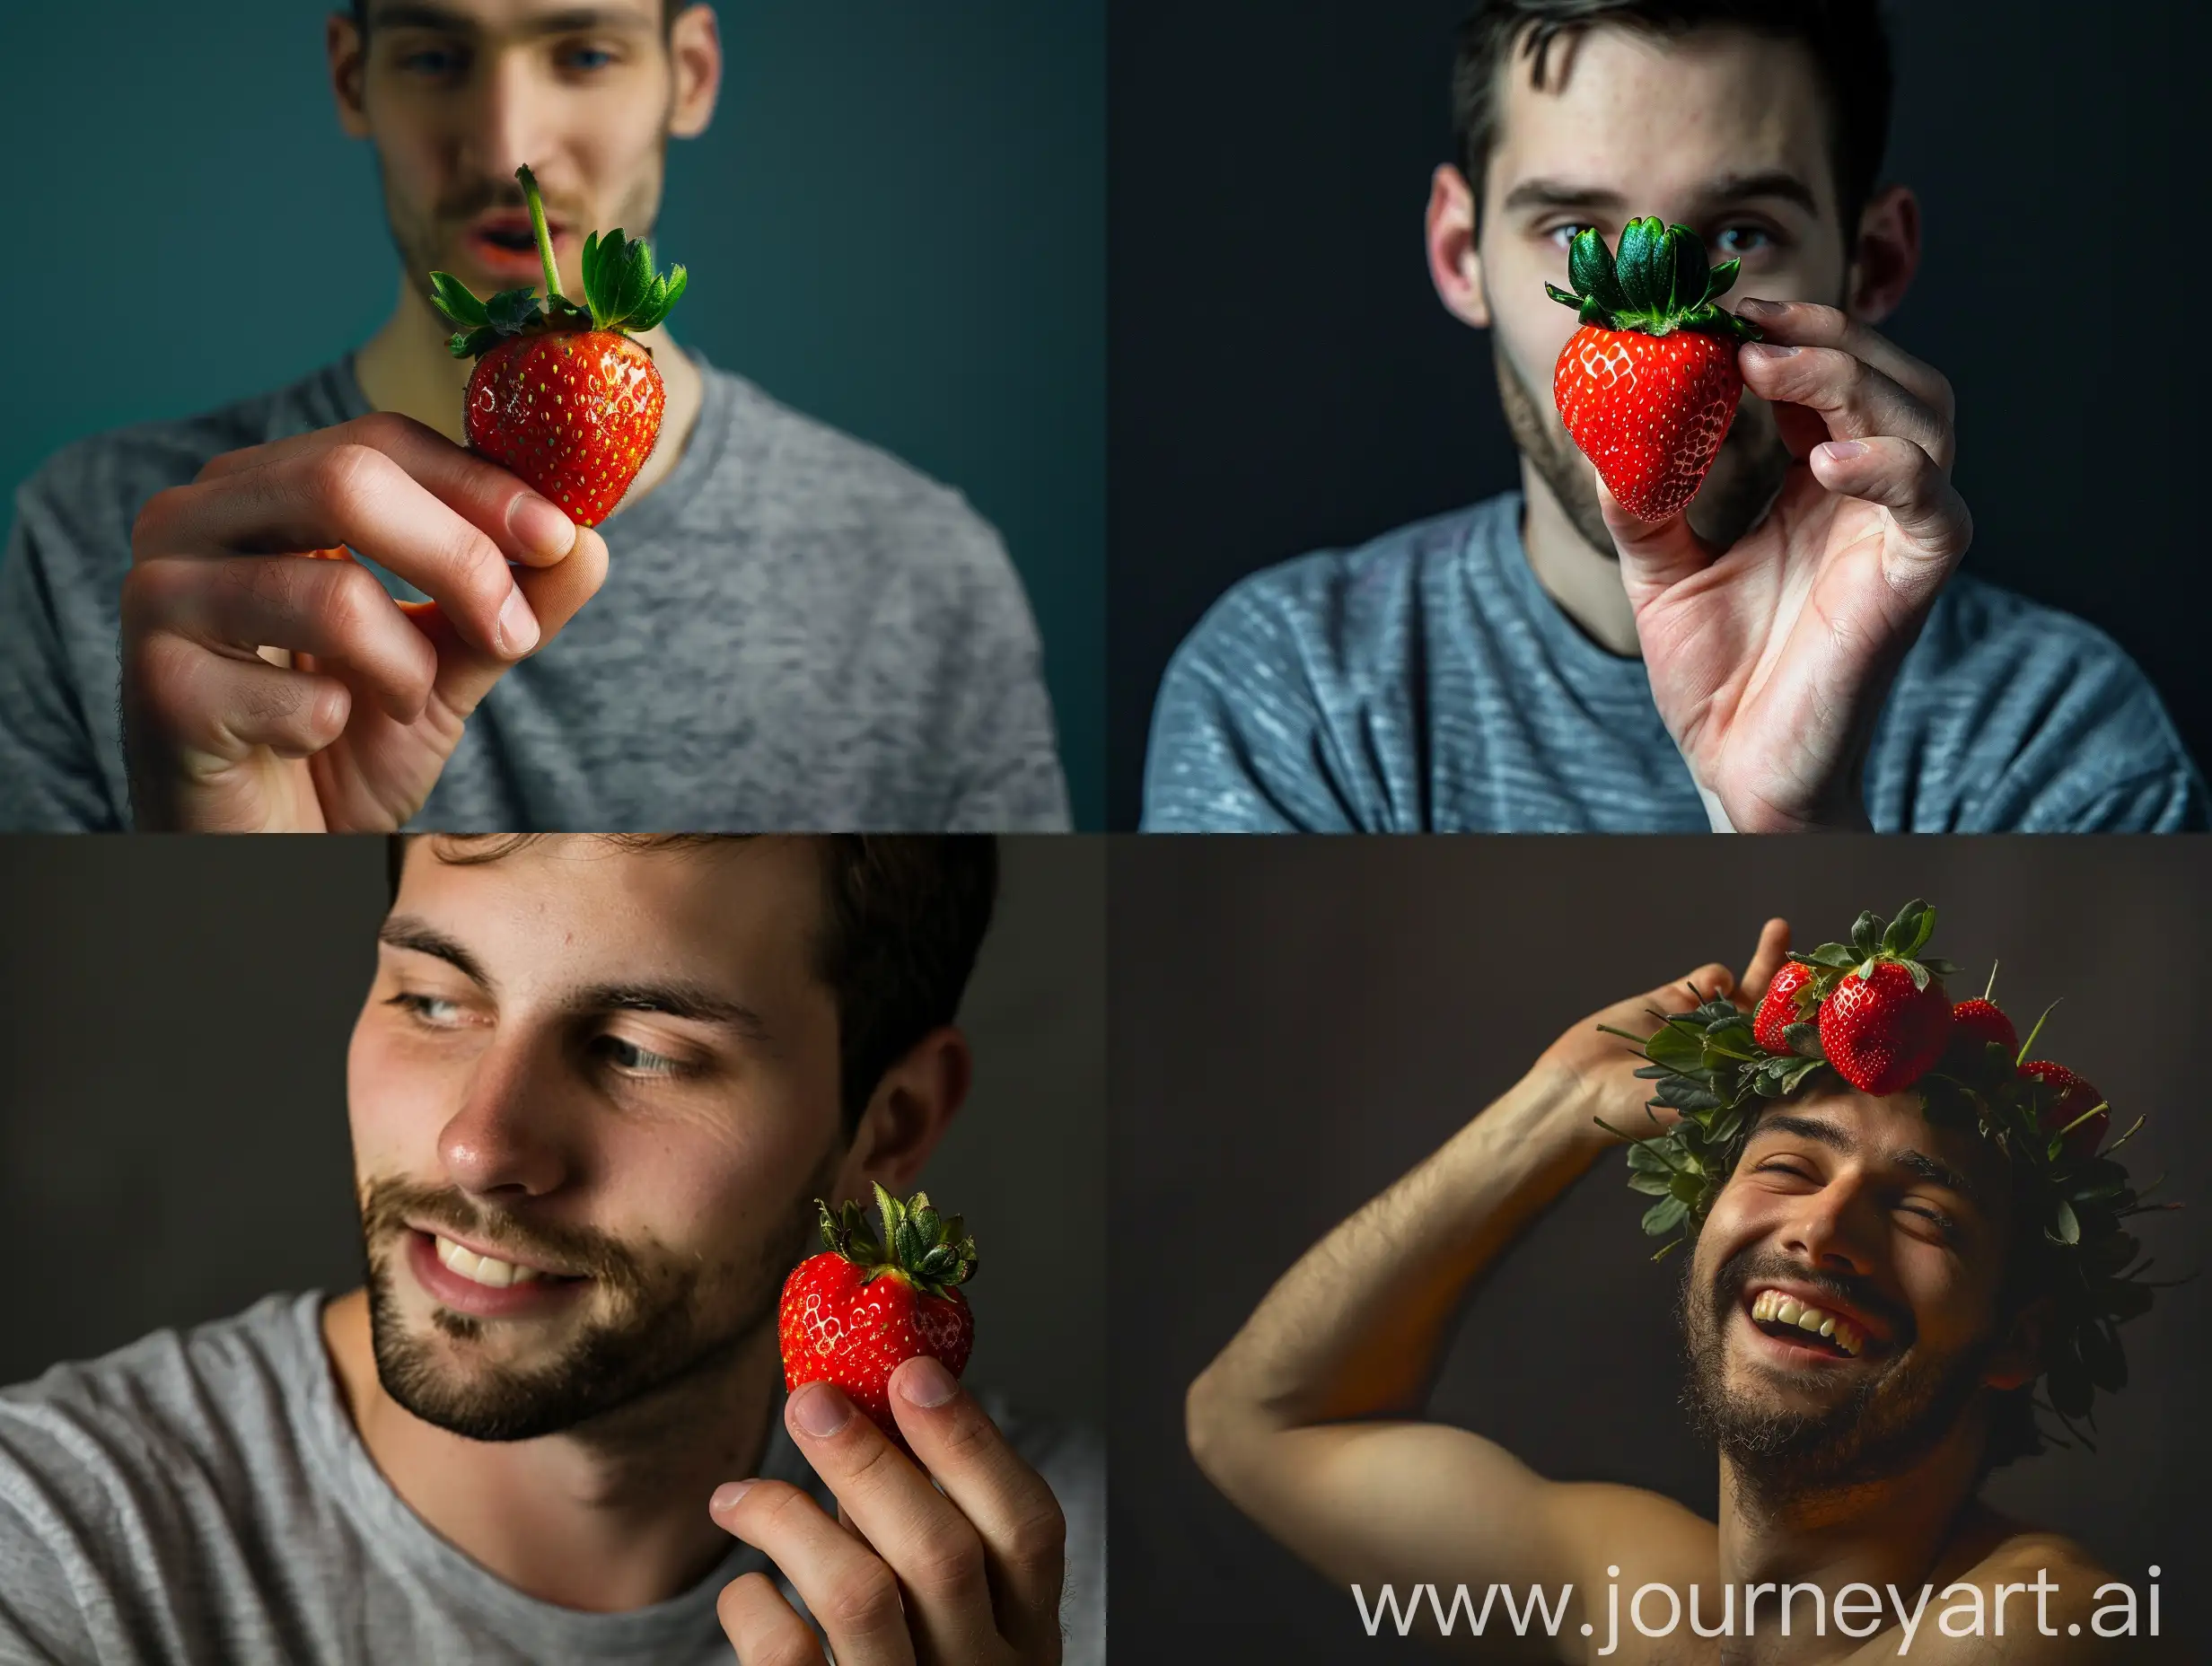 Studio photography of a man with a strawberry